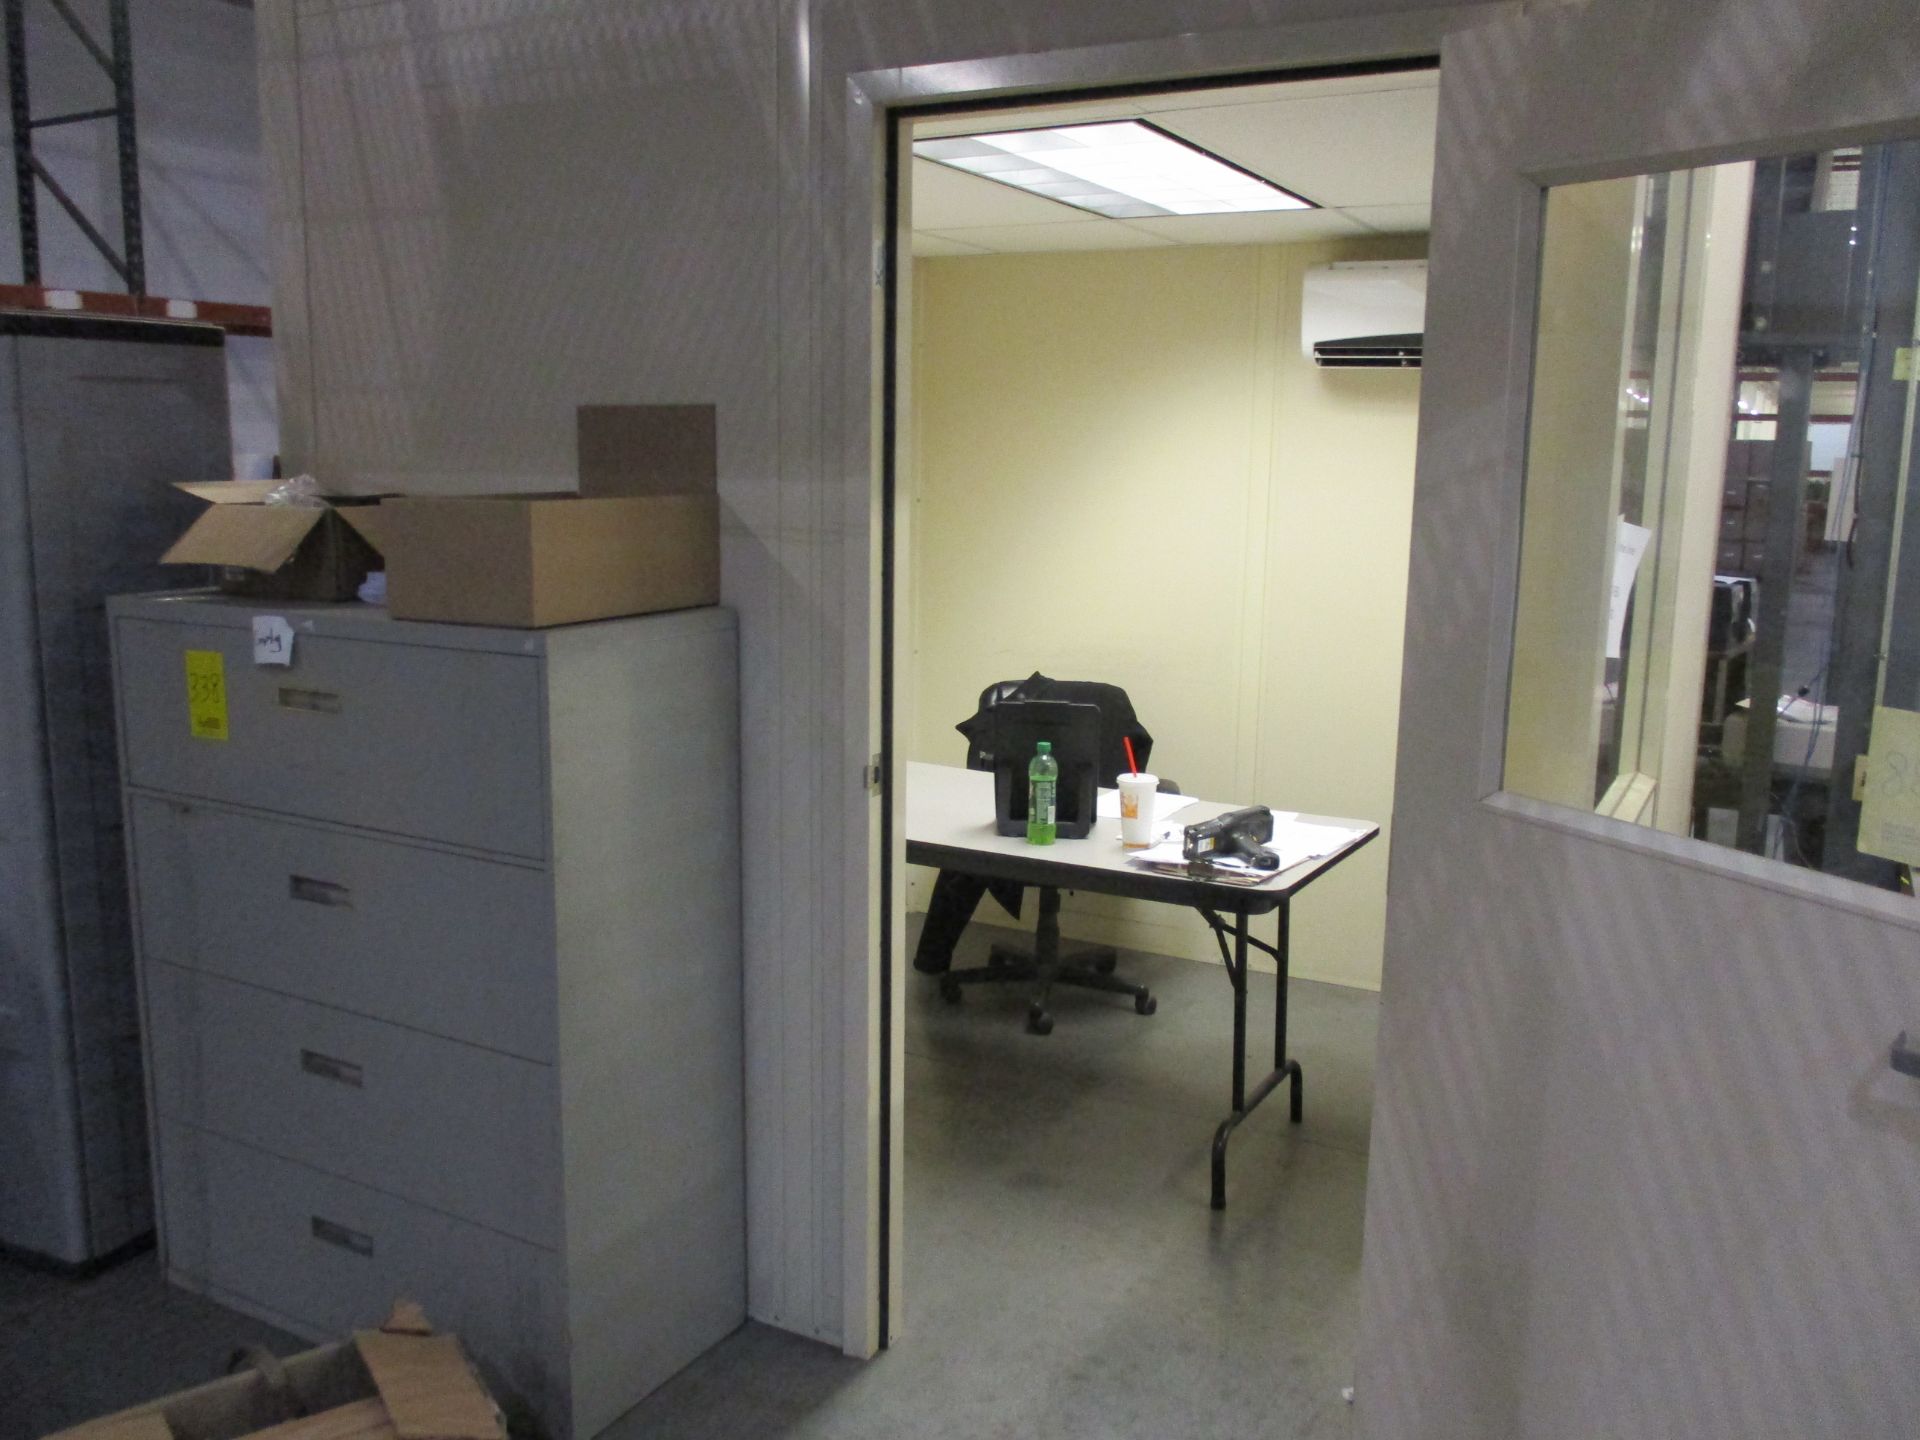 OFFICE AREA; WOOD TABLE, PLASTIC 2-DOOR CABINET, FILE CABINET, AIR CONDITIONER, AND MISC. ITEMS